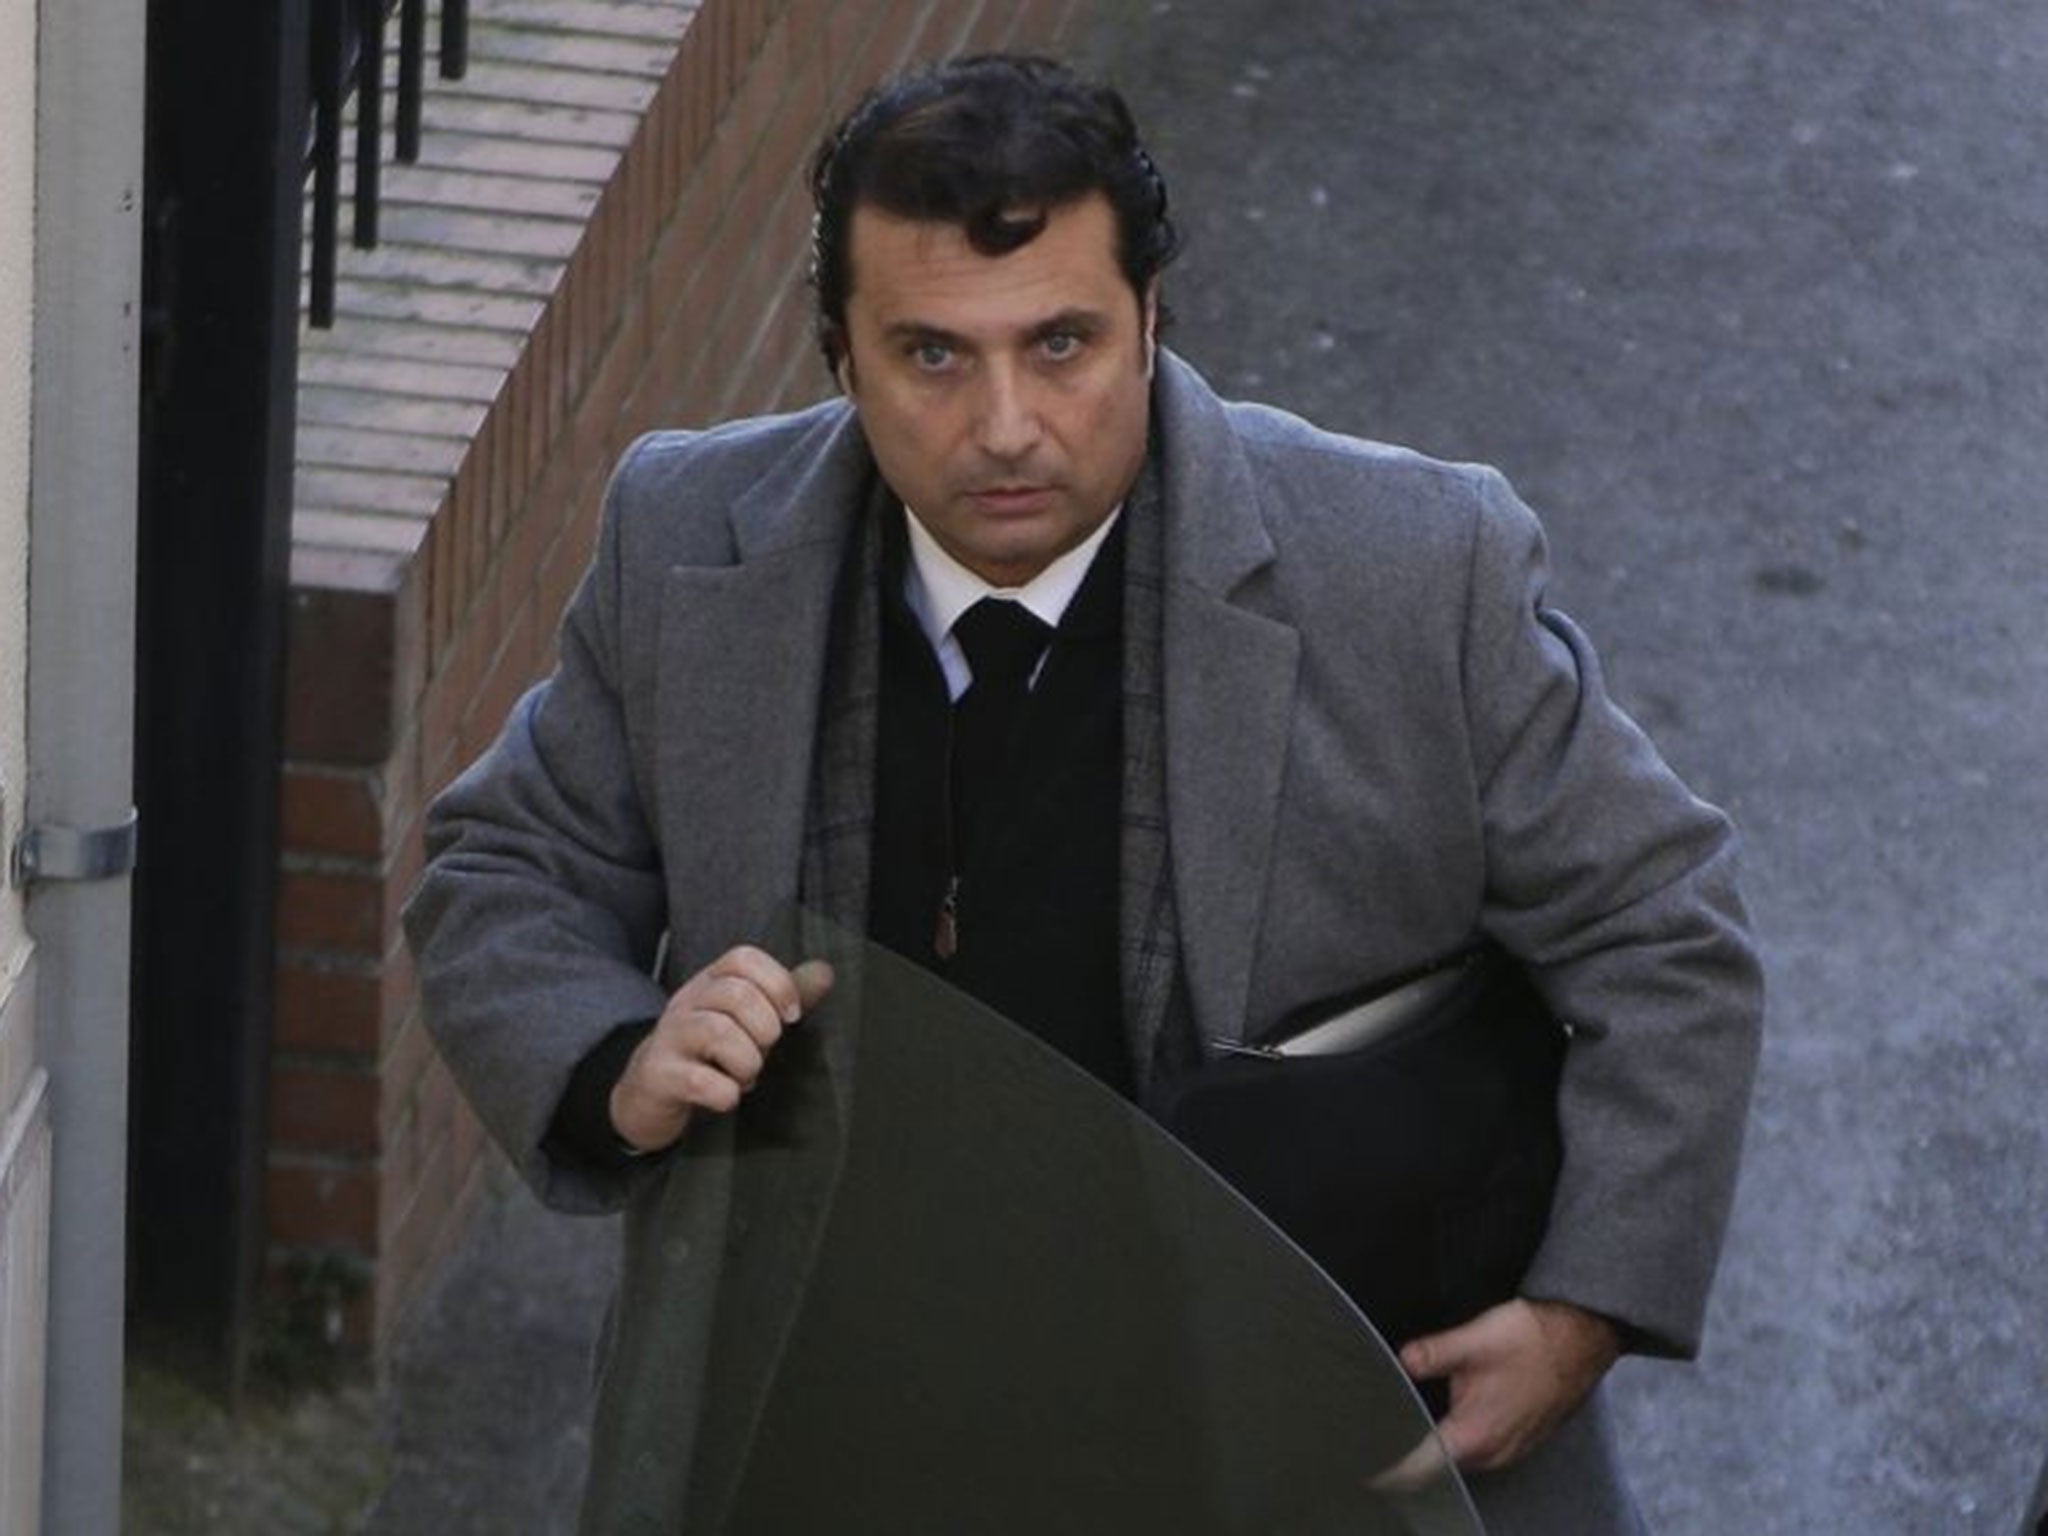 Captain of the Costa Concordia cruise liner Francesco Schettino is now a hate figure at home and abroad